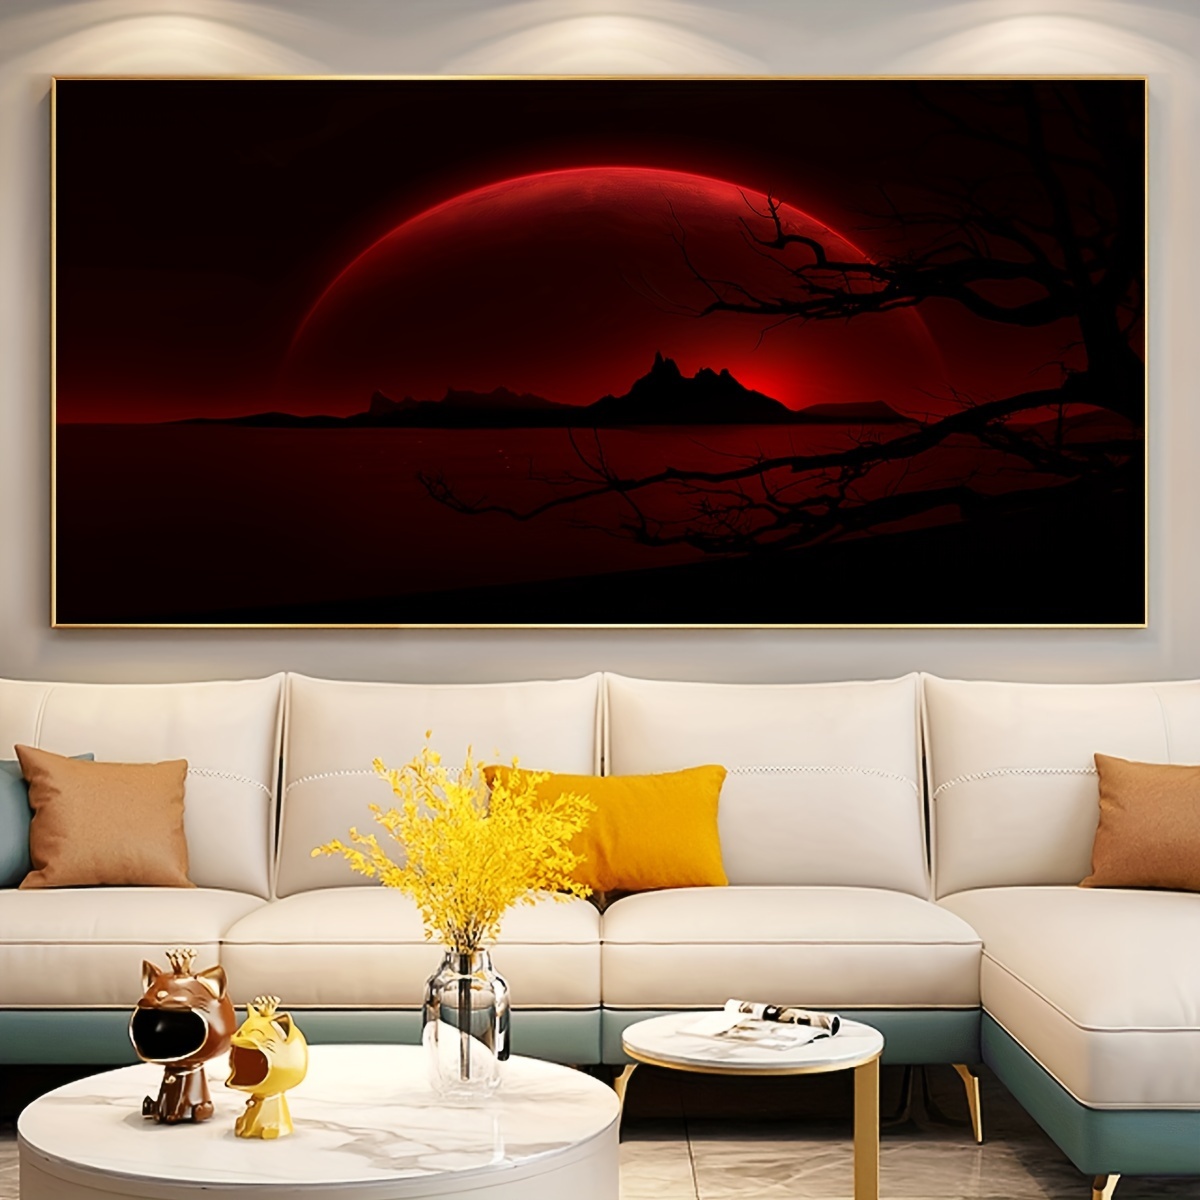 

1pc Unframed Canvas Poster, Modern Art, Sunrise And Red Sun Scenery, Ideal Gift For Bedroom Living Room Corridor, Wall Art, Wall Decor, Winter Decor, Room Decoration